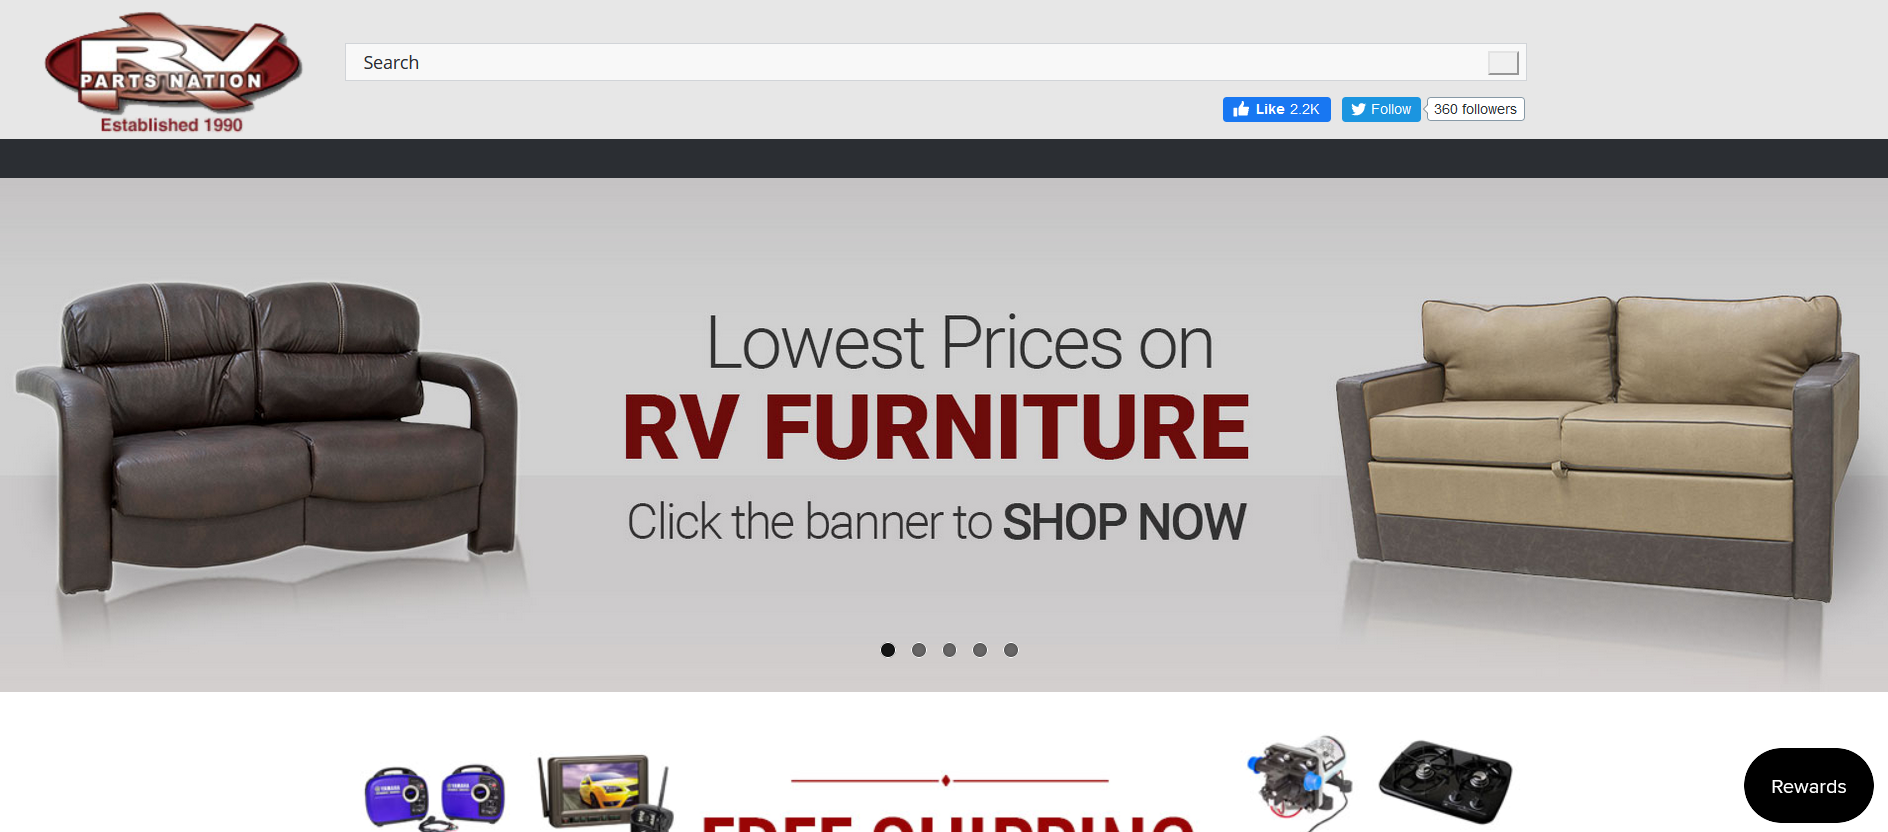 RV Parts Nation sells new RV parts of all types